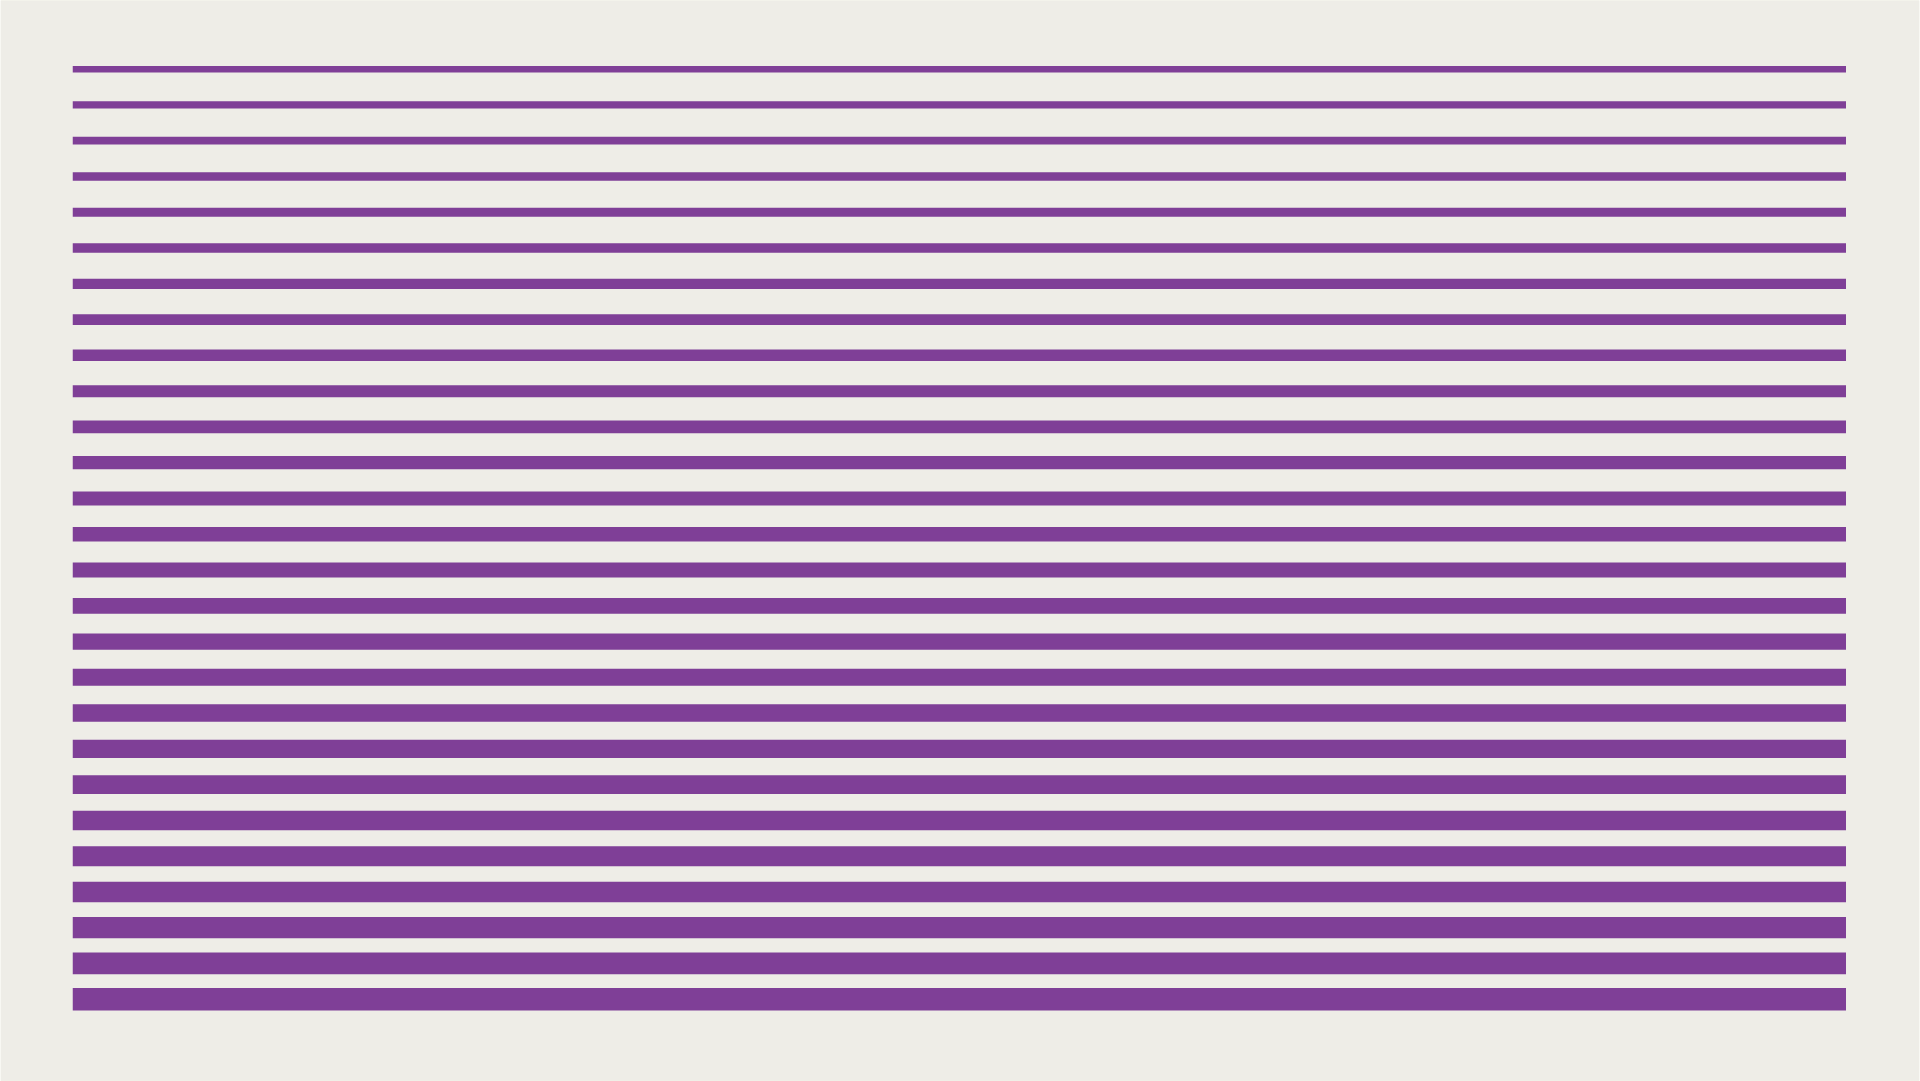 Decorative graphic with striped purple lines